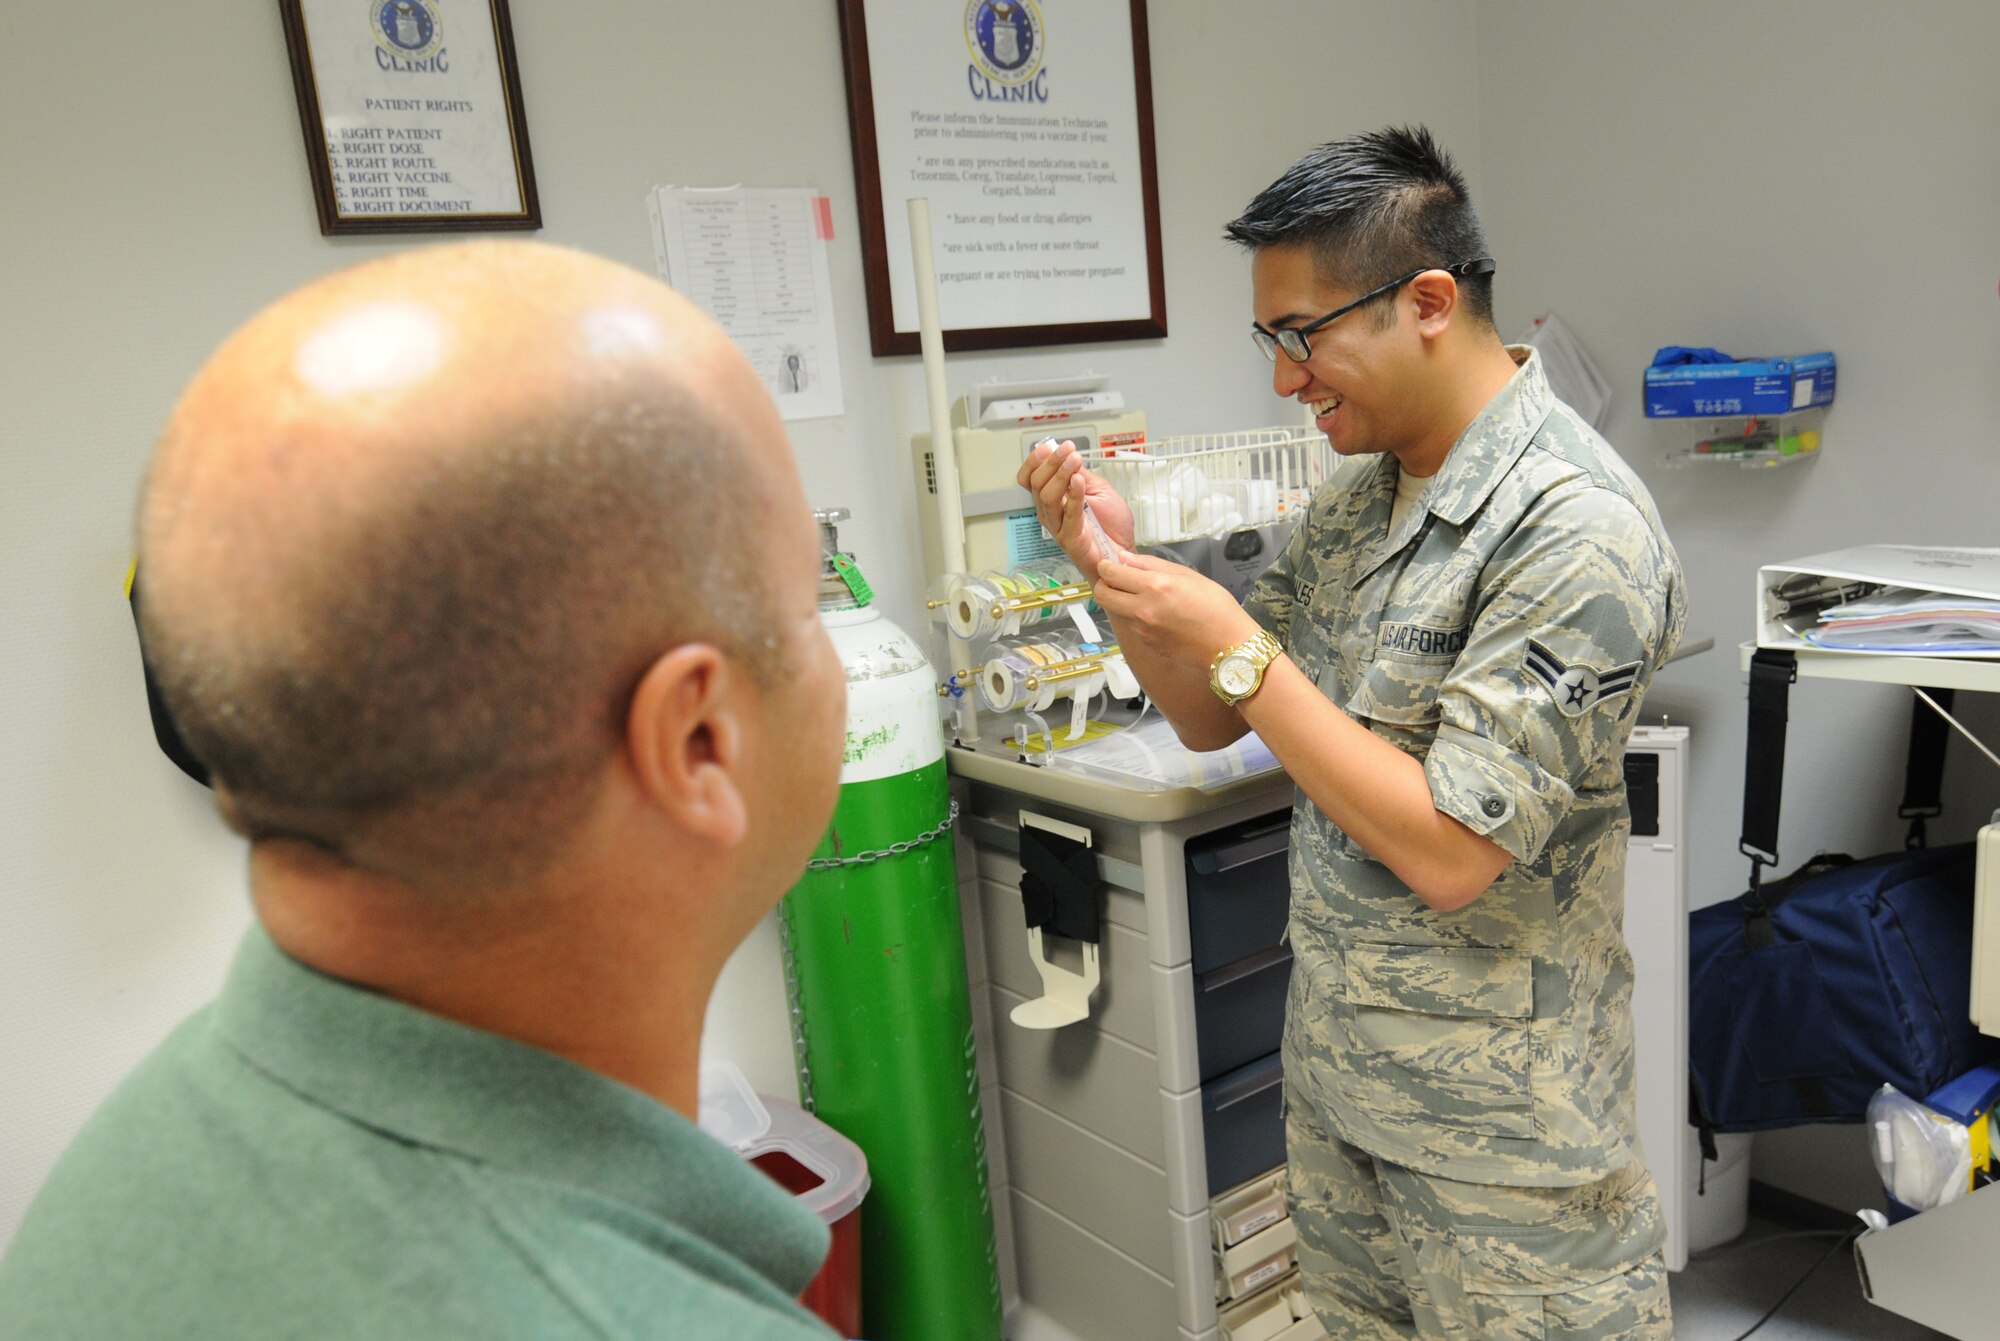 A picture of U.S. Air Force Airman 1st Class William Sales, an aerospace medical technician from the New Jersey Air National Guard's 177th Medical Group, demonstrating proper immunization techniques.